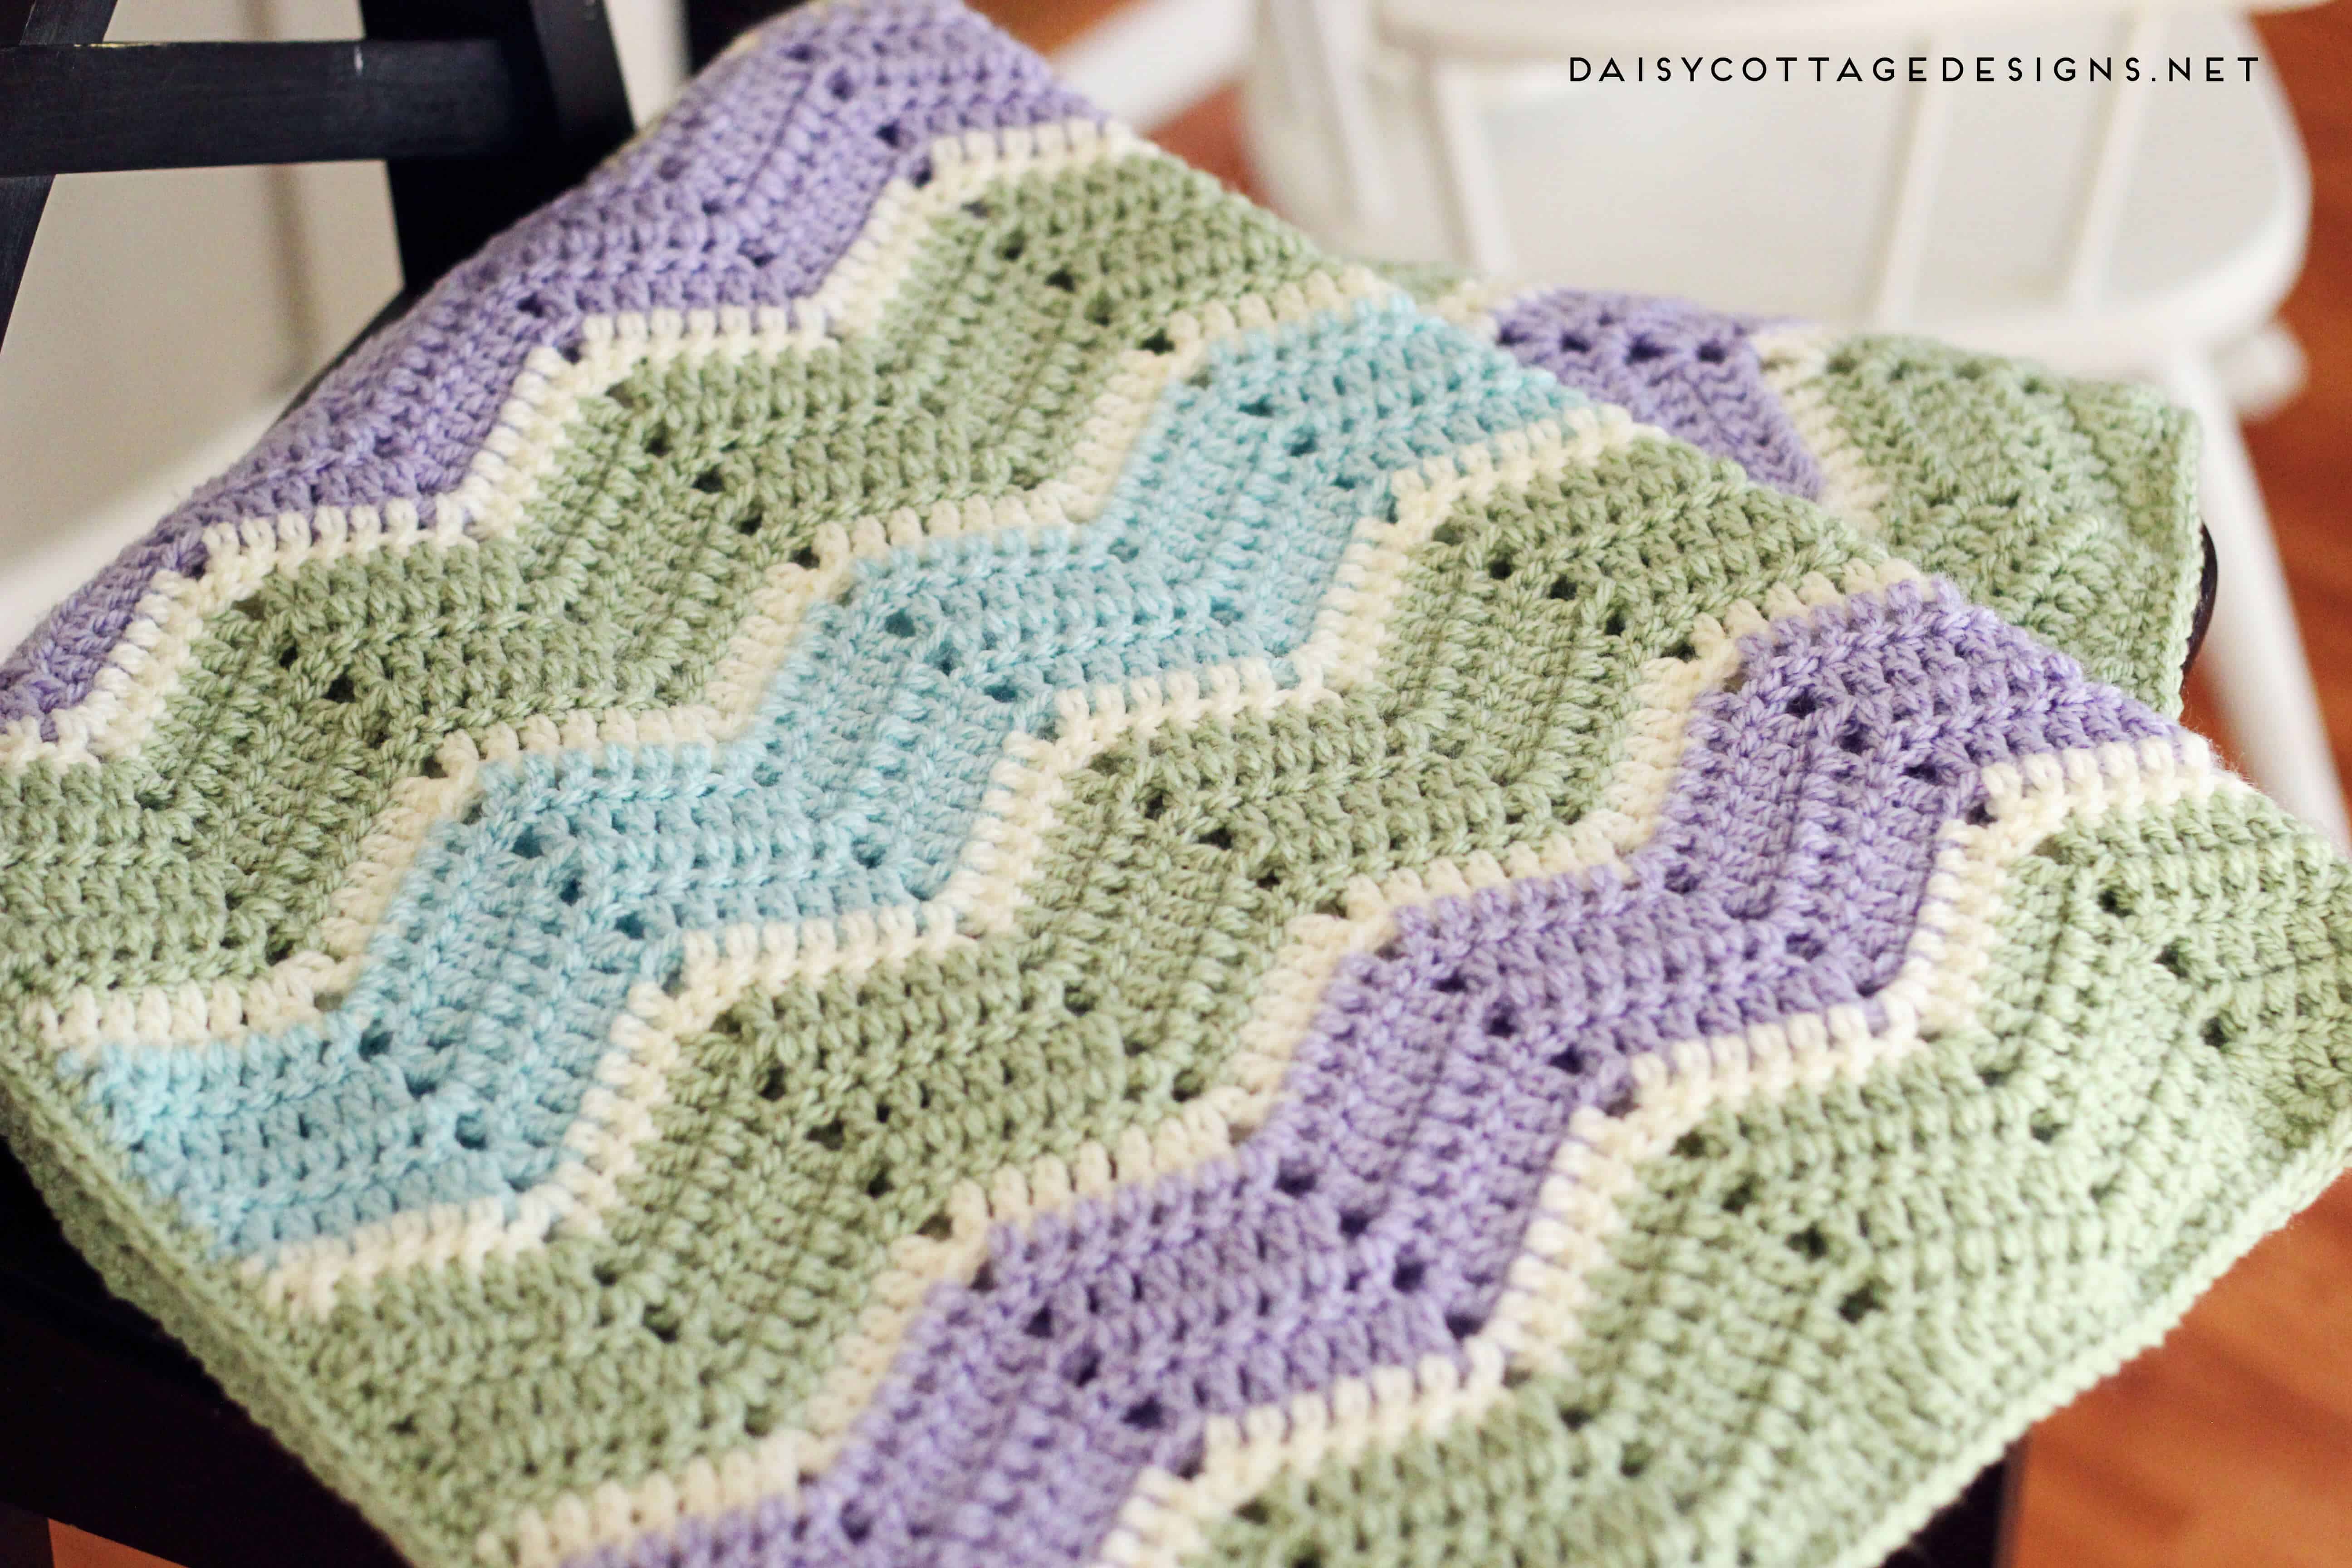 How To Make A Ripple Blanket Crochet Pattern Daisy Cottage Designs,Cat Colors